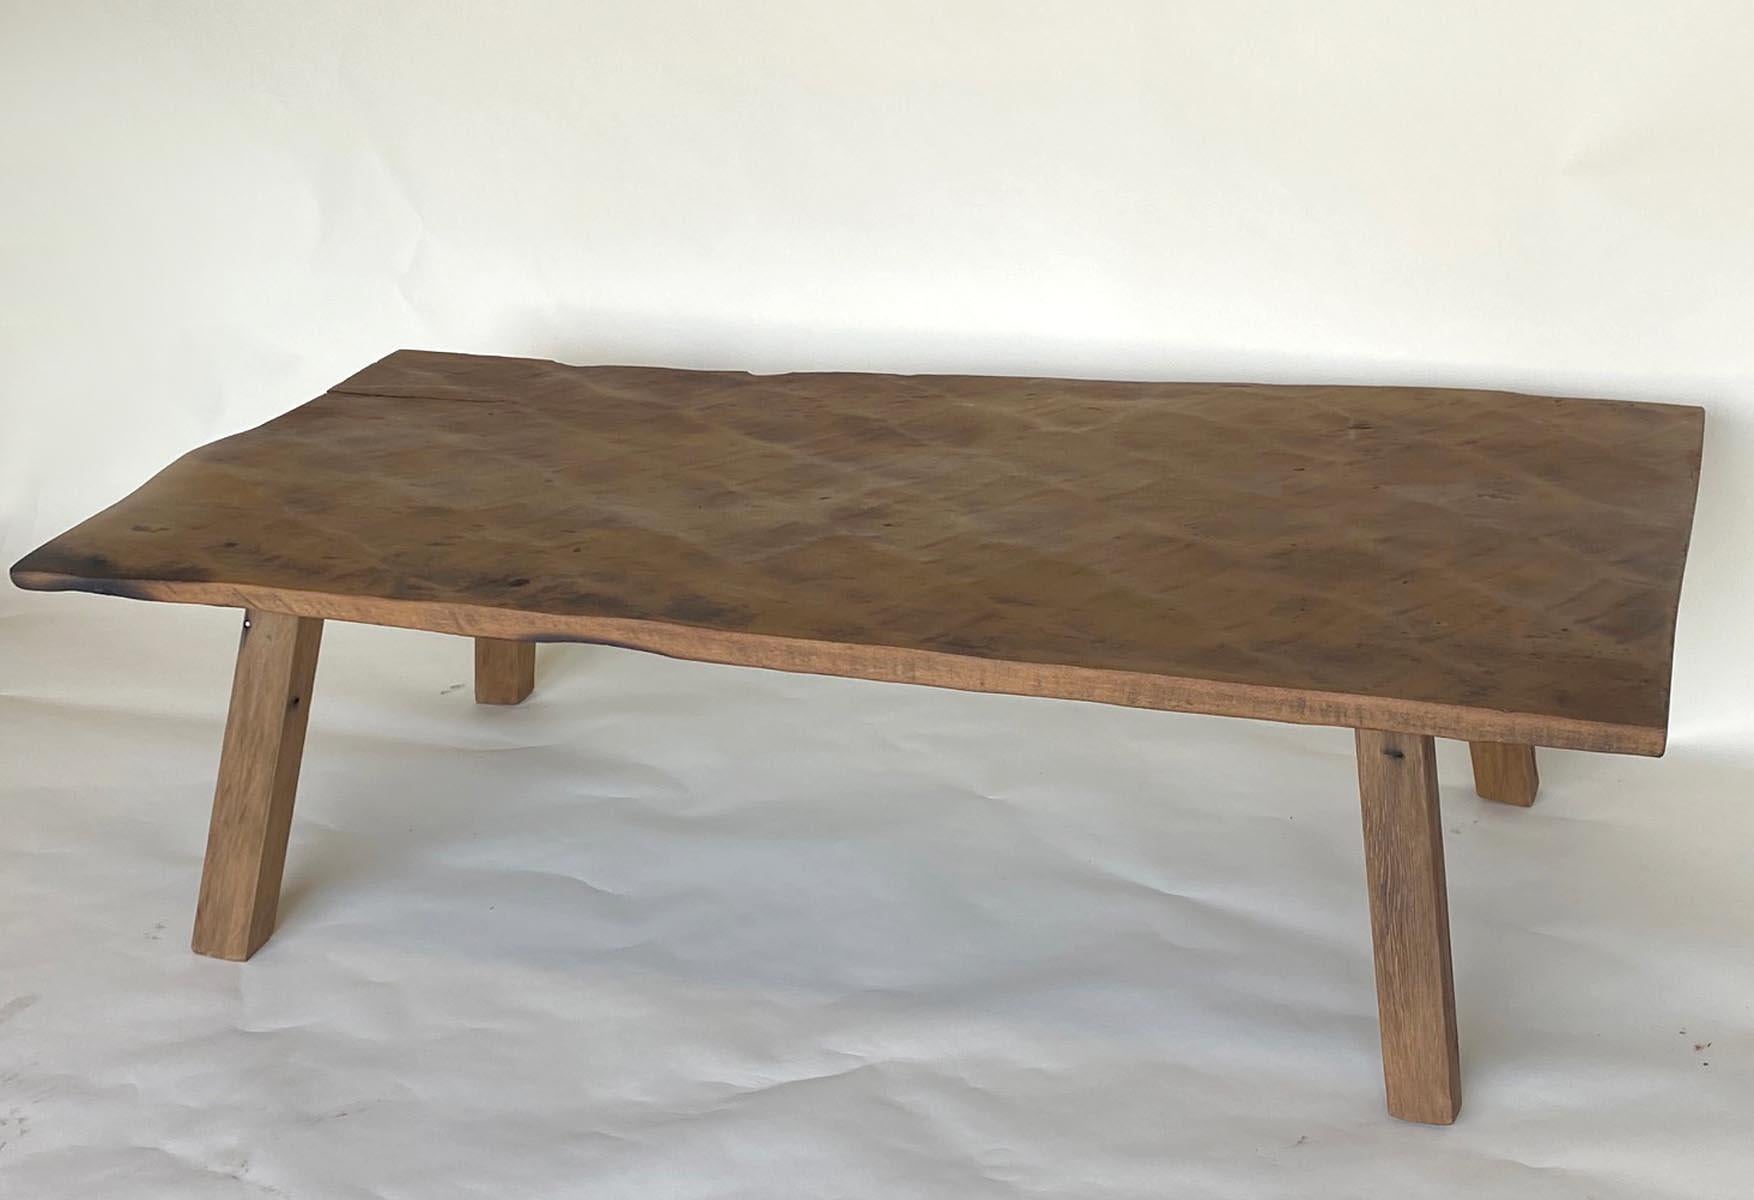 Rustic Antique One Wide Board Coffee Table